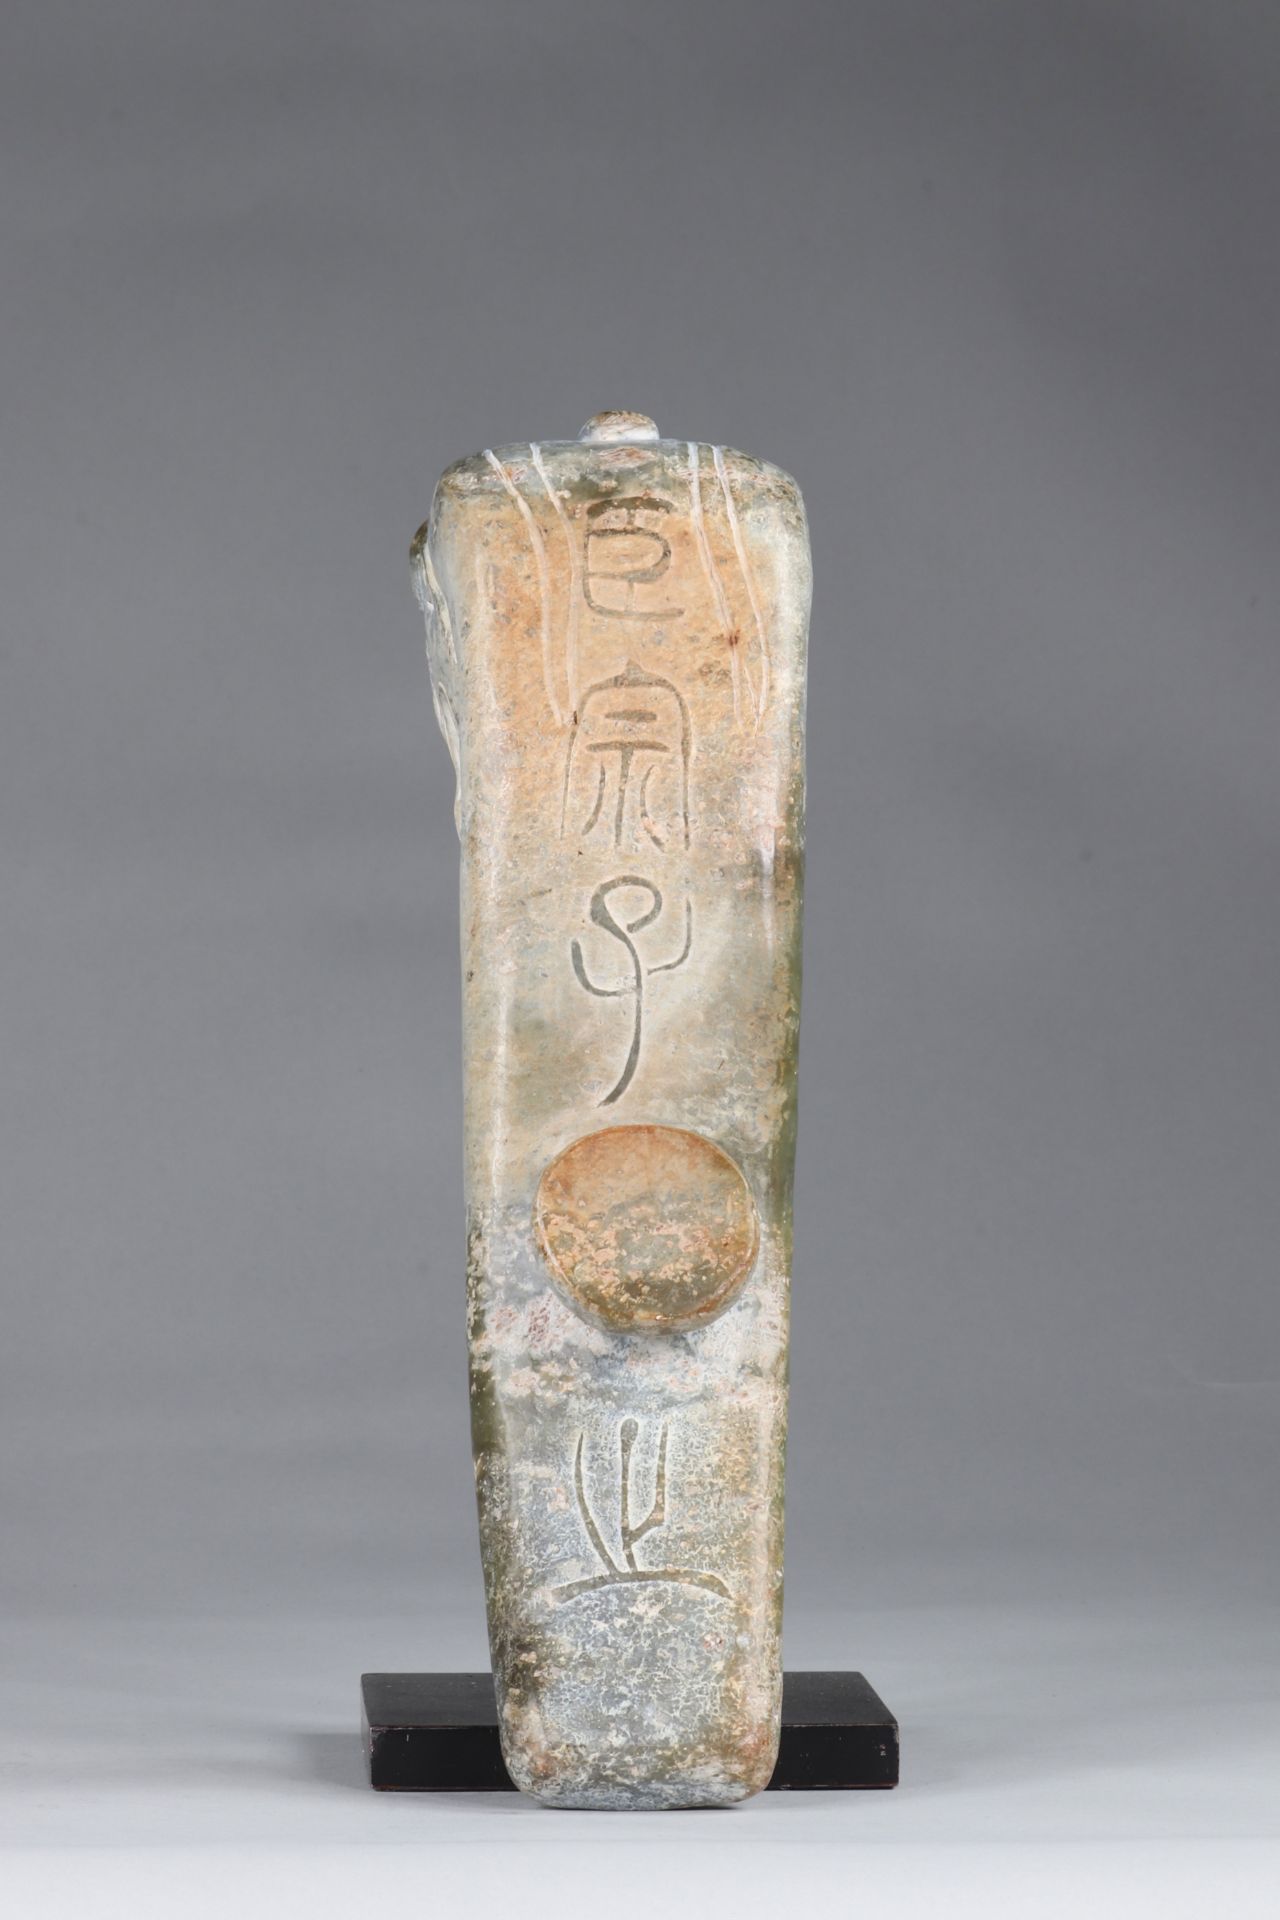 Ritual belt buckle in pale celadon jade, decorated with dragons - Archaic - characters indicating th - Image 4 of 7